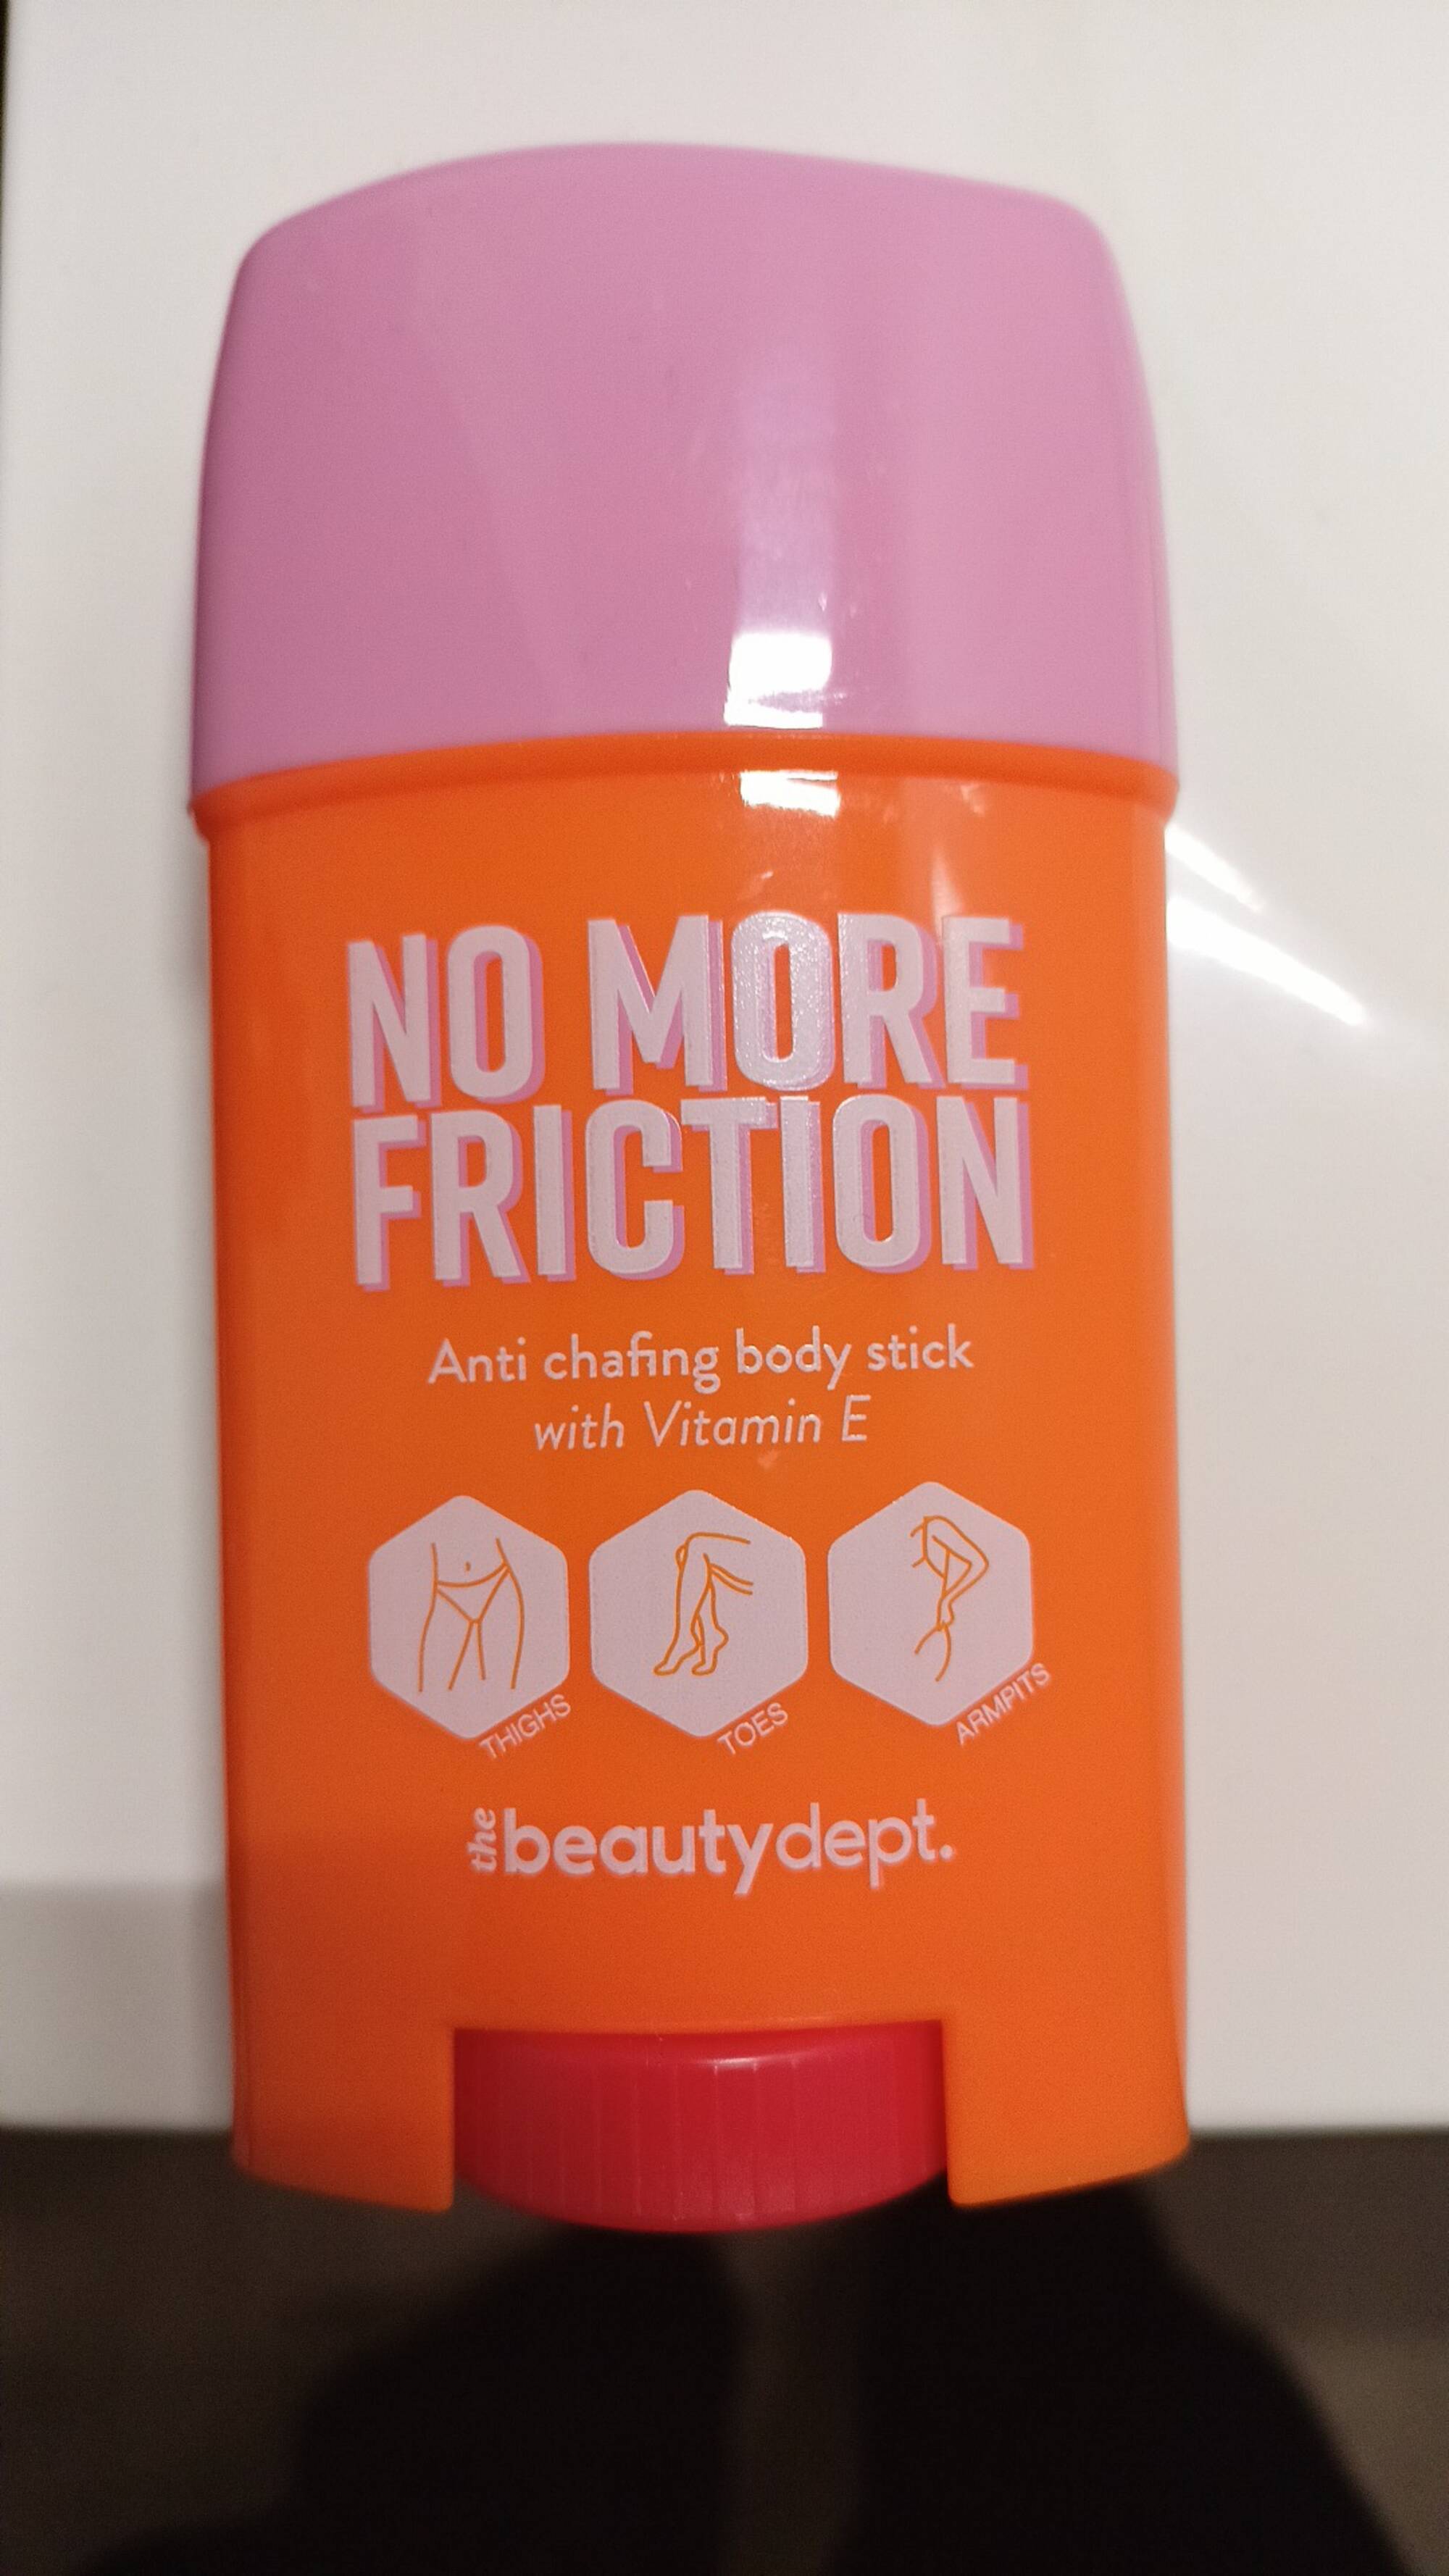 THE BEAUTY DEPT - No more friction anti chafing body stick